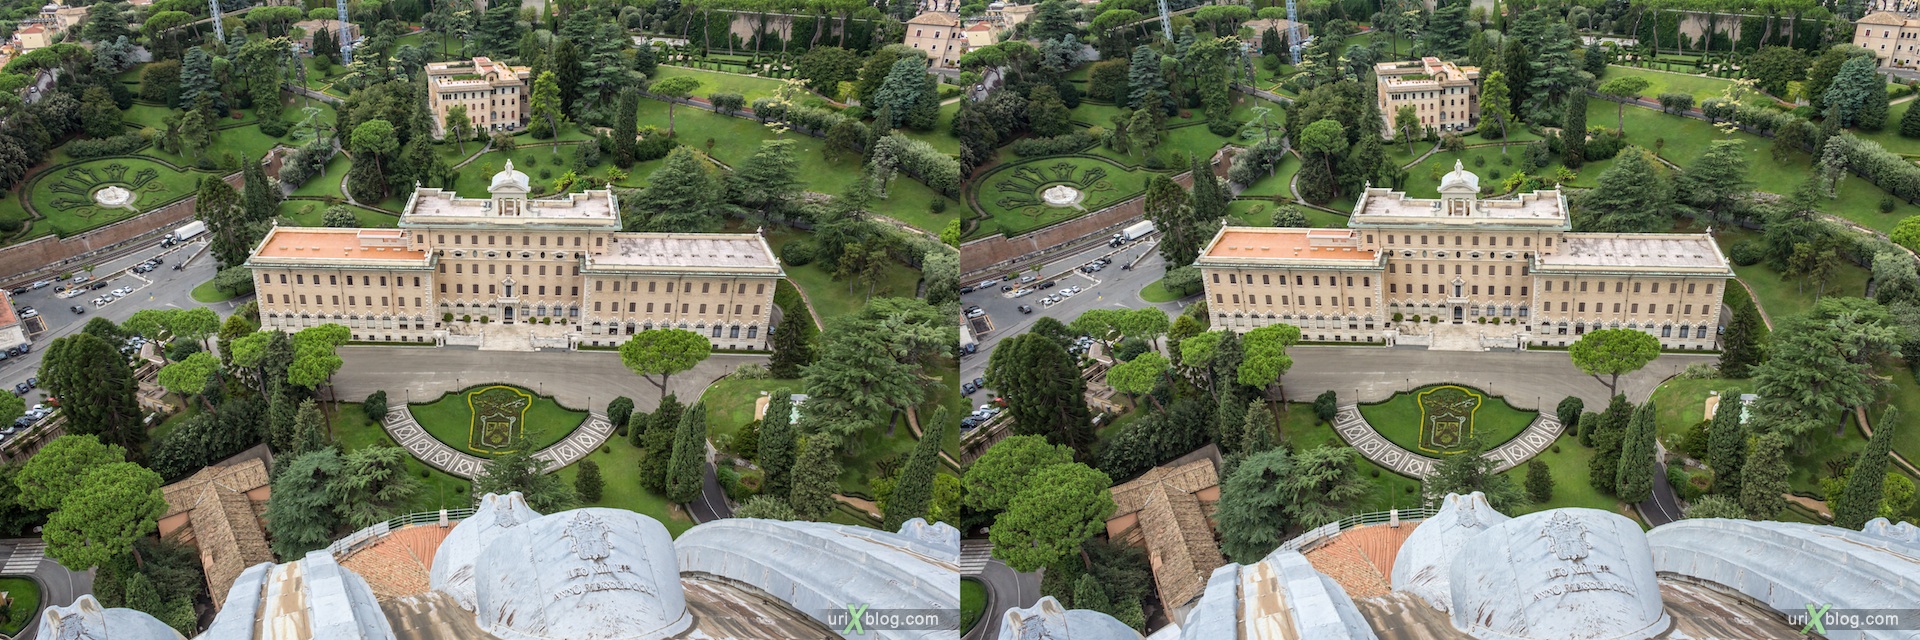 2012, Saint Peter's Basilica, Vatican, Rome, Italy, 3D, stereo pair, cross-eyed, crossview, cross view stereo pair